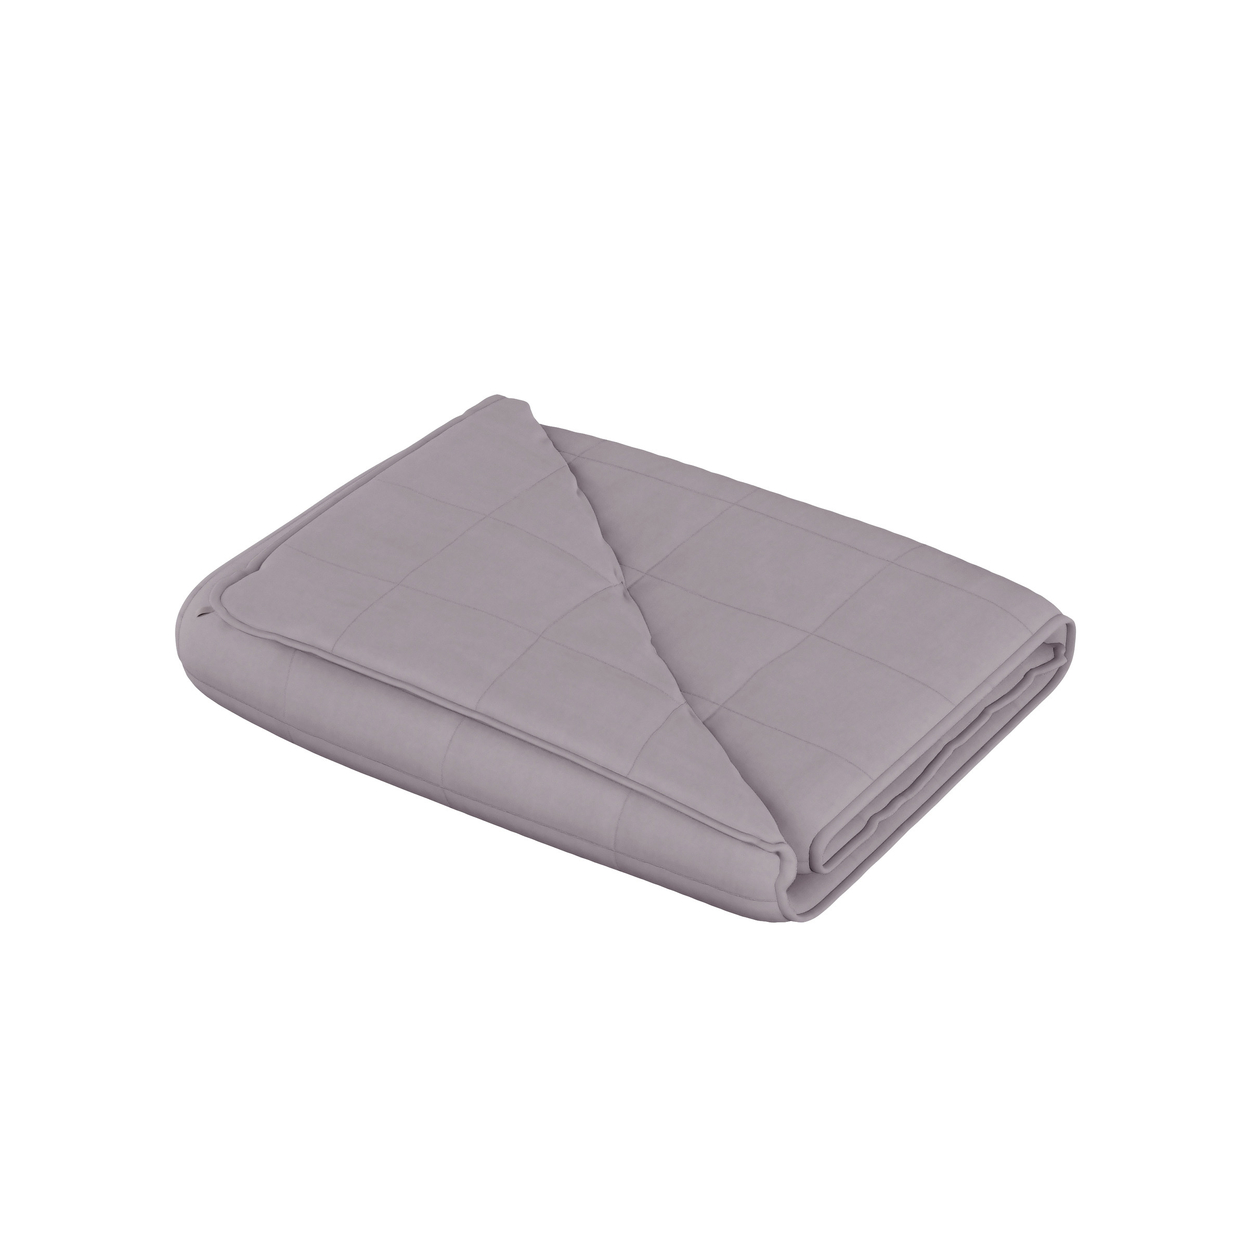 Weighted Blanket 48 X 72 15 Lbs Grey Front And Back Pantone #17-1502